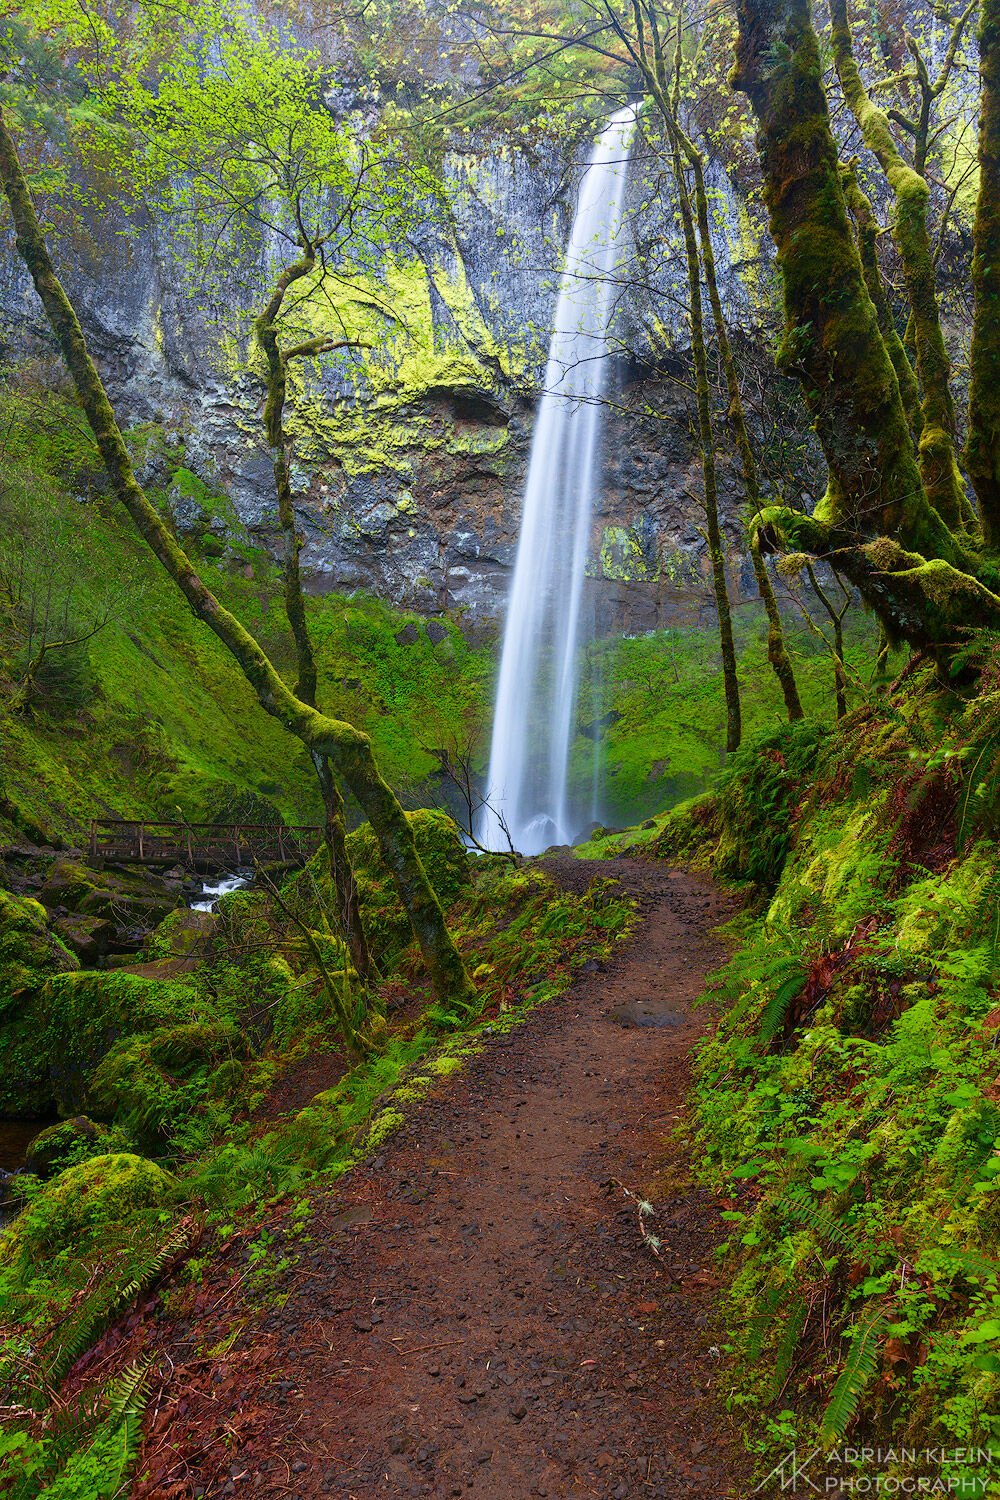 The trail for Elowah Falls in the Columbia River Gorge of Oregon. On this spring day the leaves are just starting to come out...